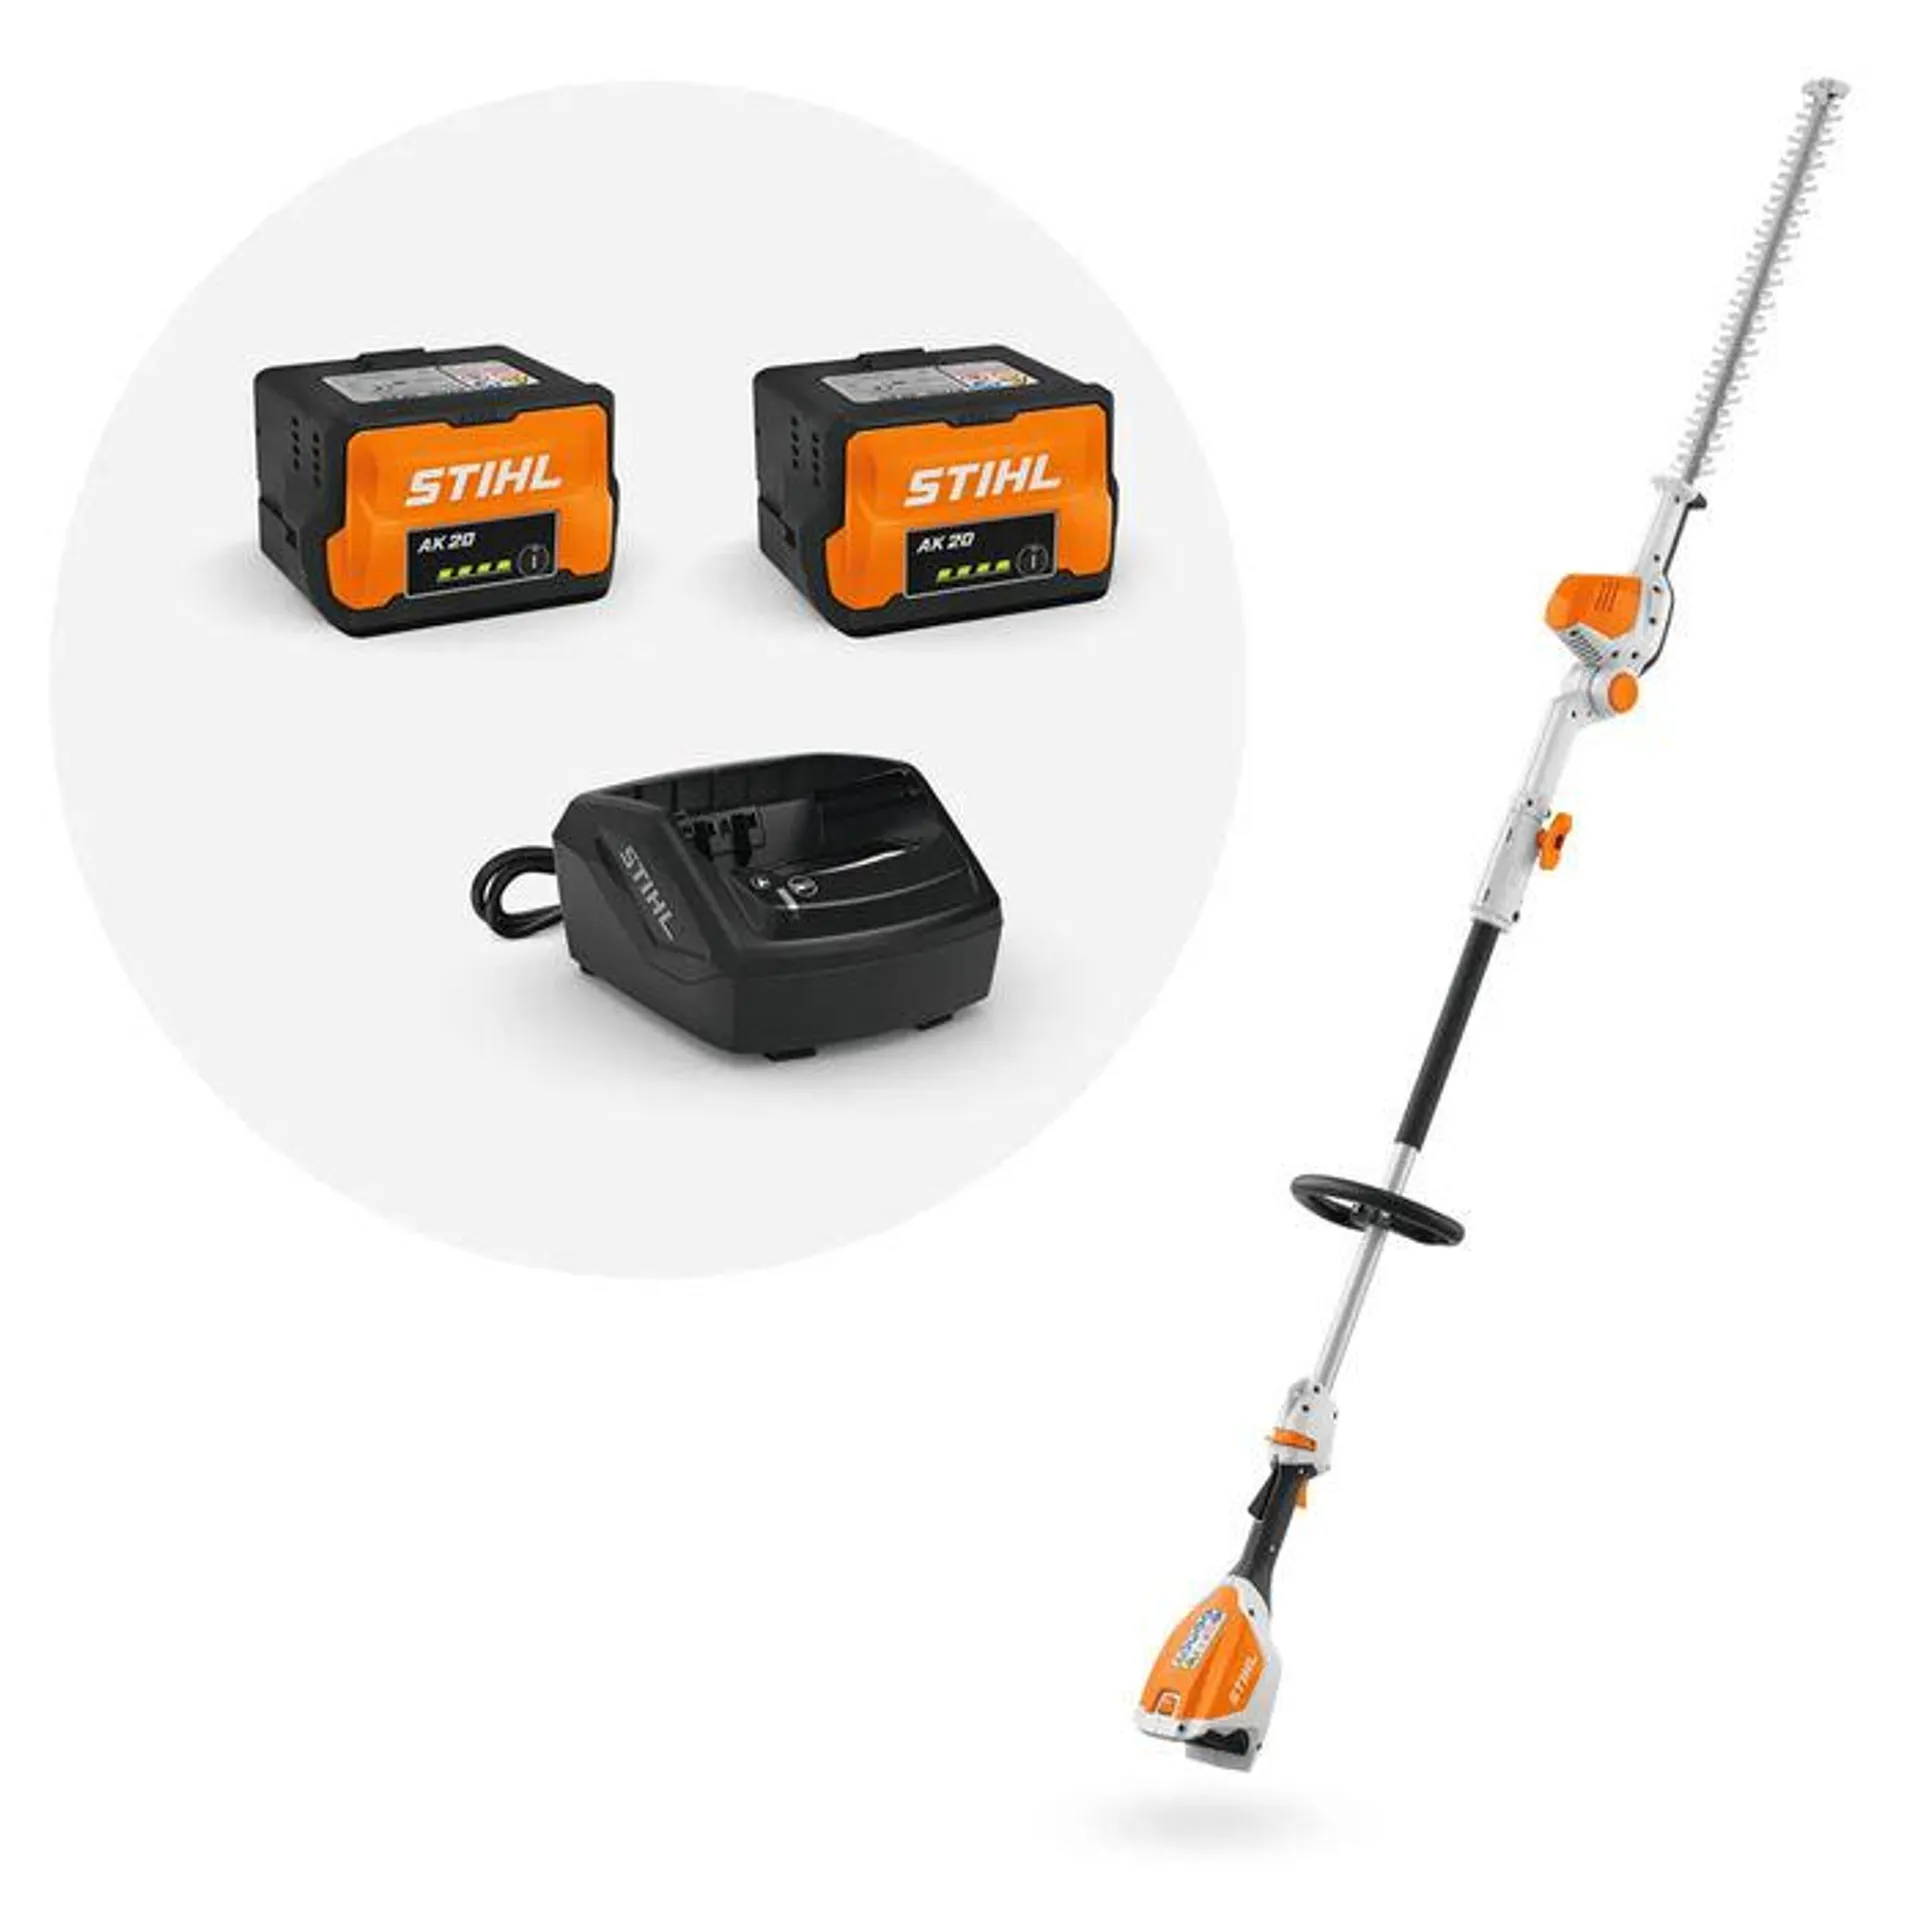 STIHL HLA 56 Battery Hedgetrimmer Kit With free second battery